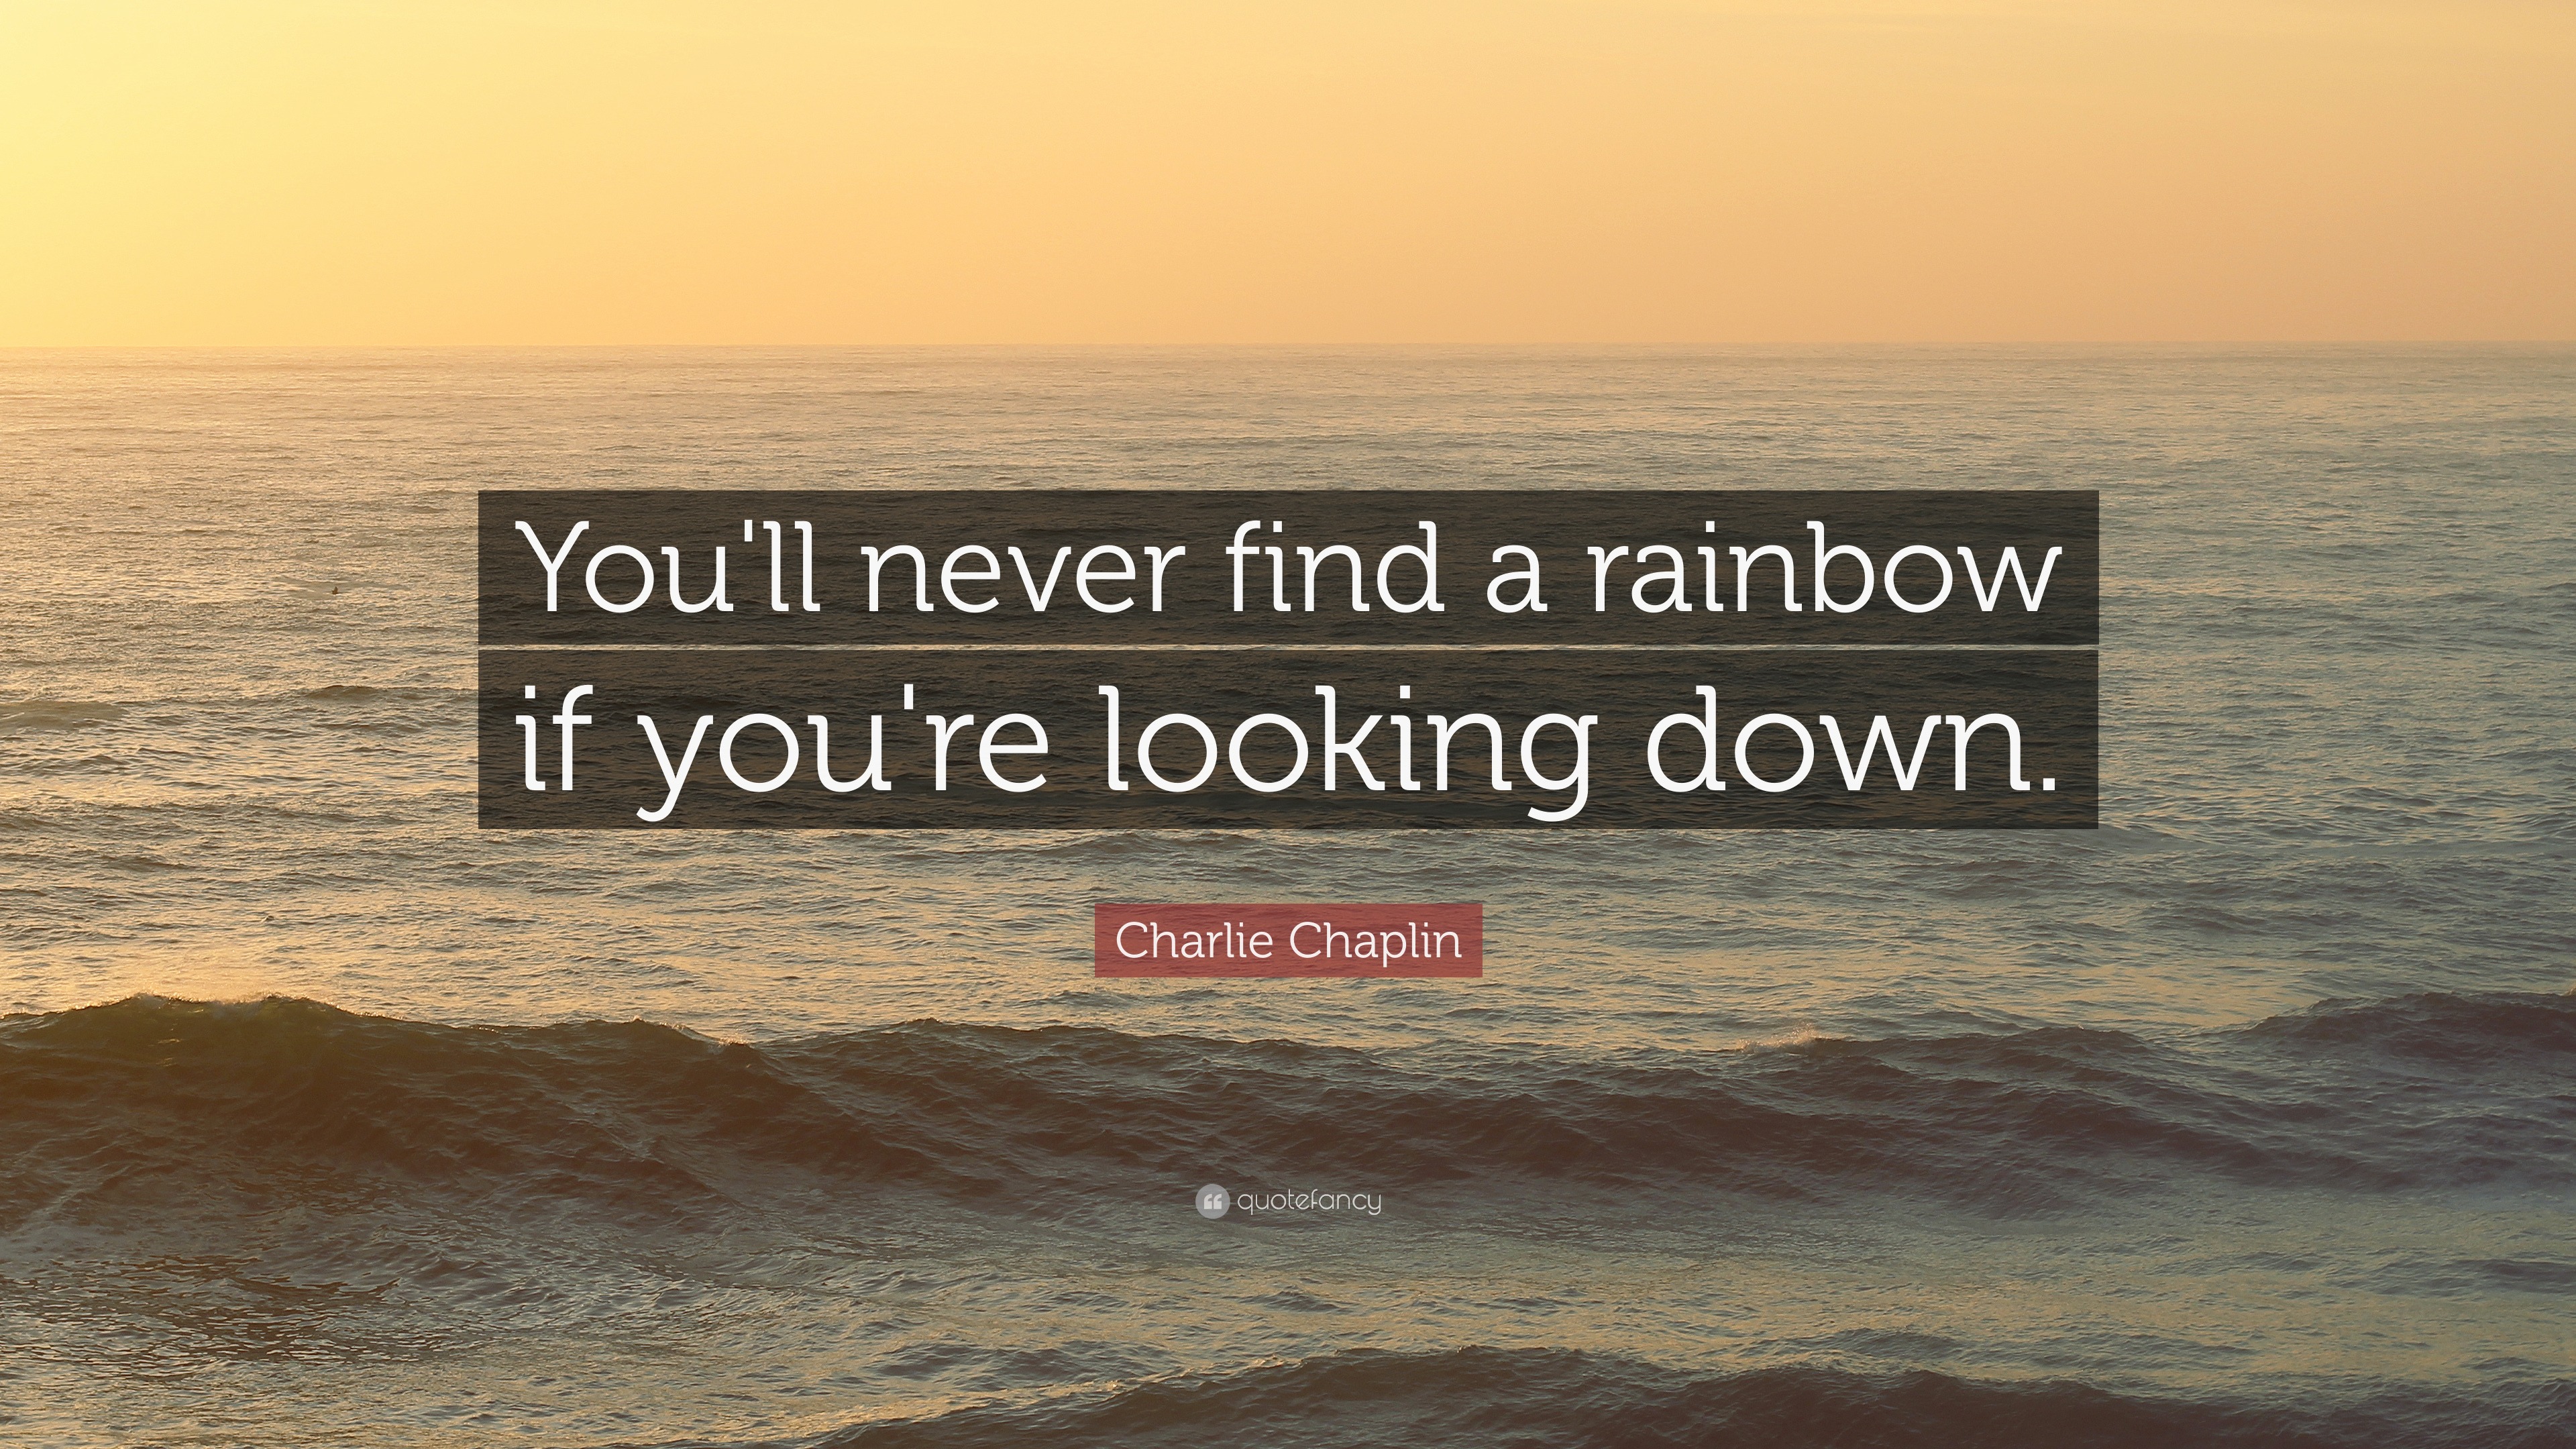 Details about   Charlie Chaplin You'll Never Find A Rainbow 11x14 Unframed Typography Book